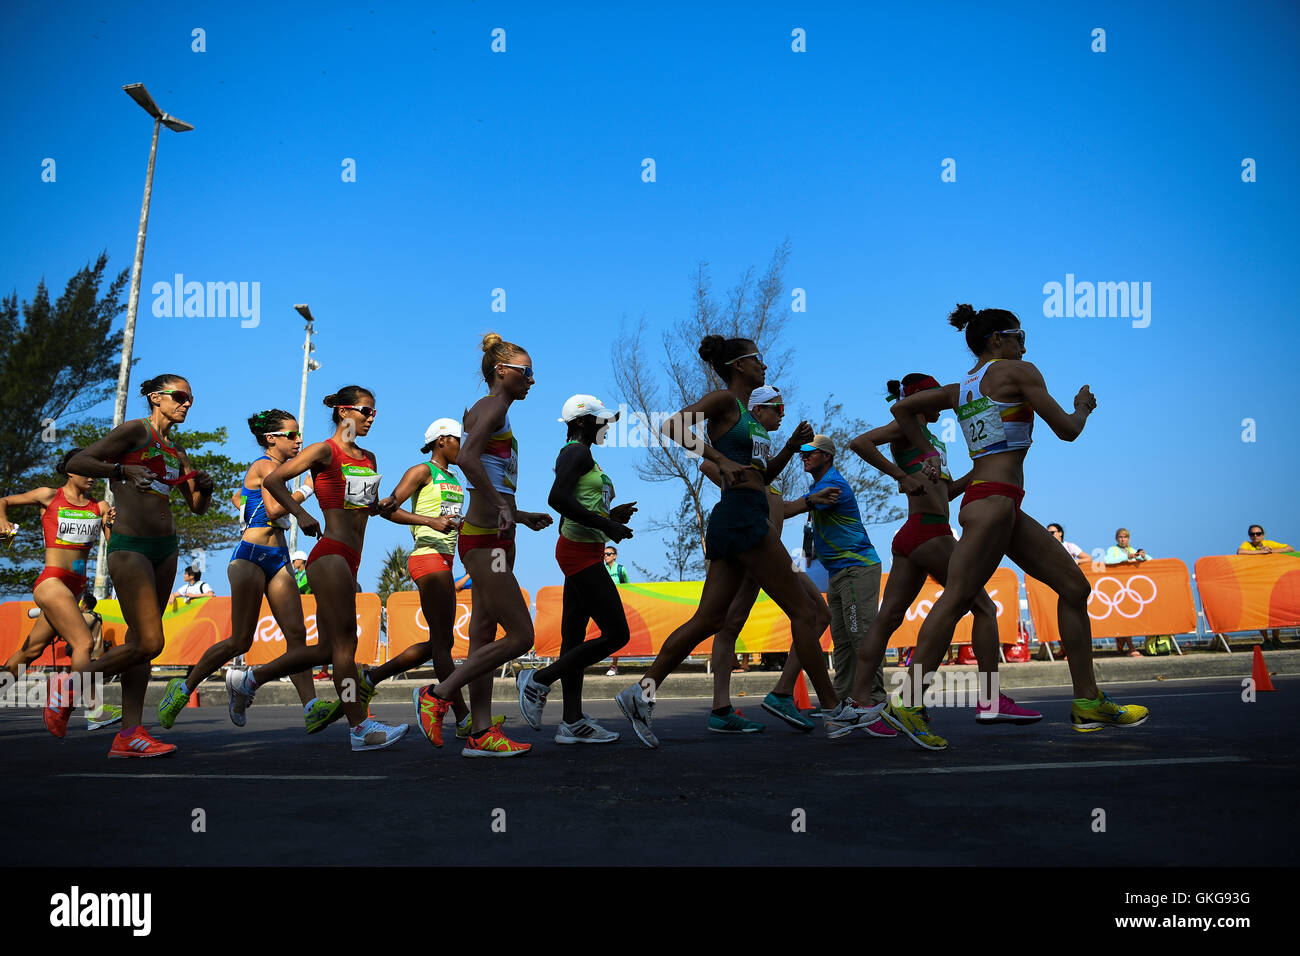 Rio de Janeiro, Brazil. 19th August, 2016. athletes on the first lap during the womens 20km race walk on Day 14 of the 2016 Rio Olympics at Pontal on August 19, 2016 in Rio de Janeiro, Brazil. (Photo by Roger Sedres/Gallo Images) Credit:  Roger Sedres/Alamy Live News Stock Photo